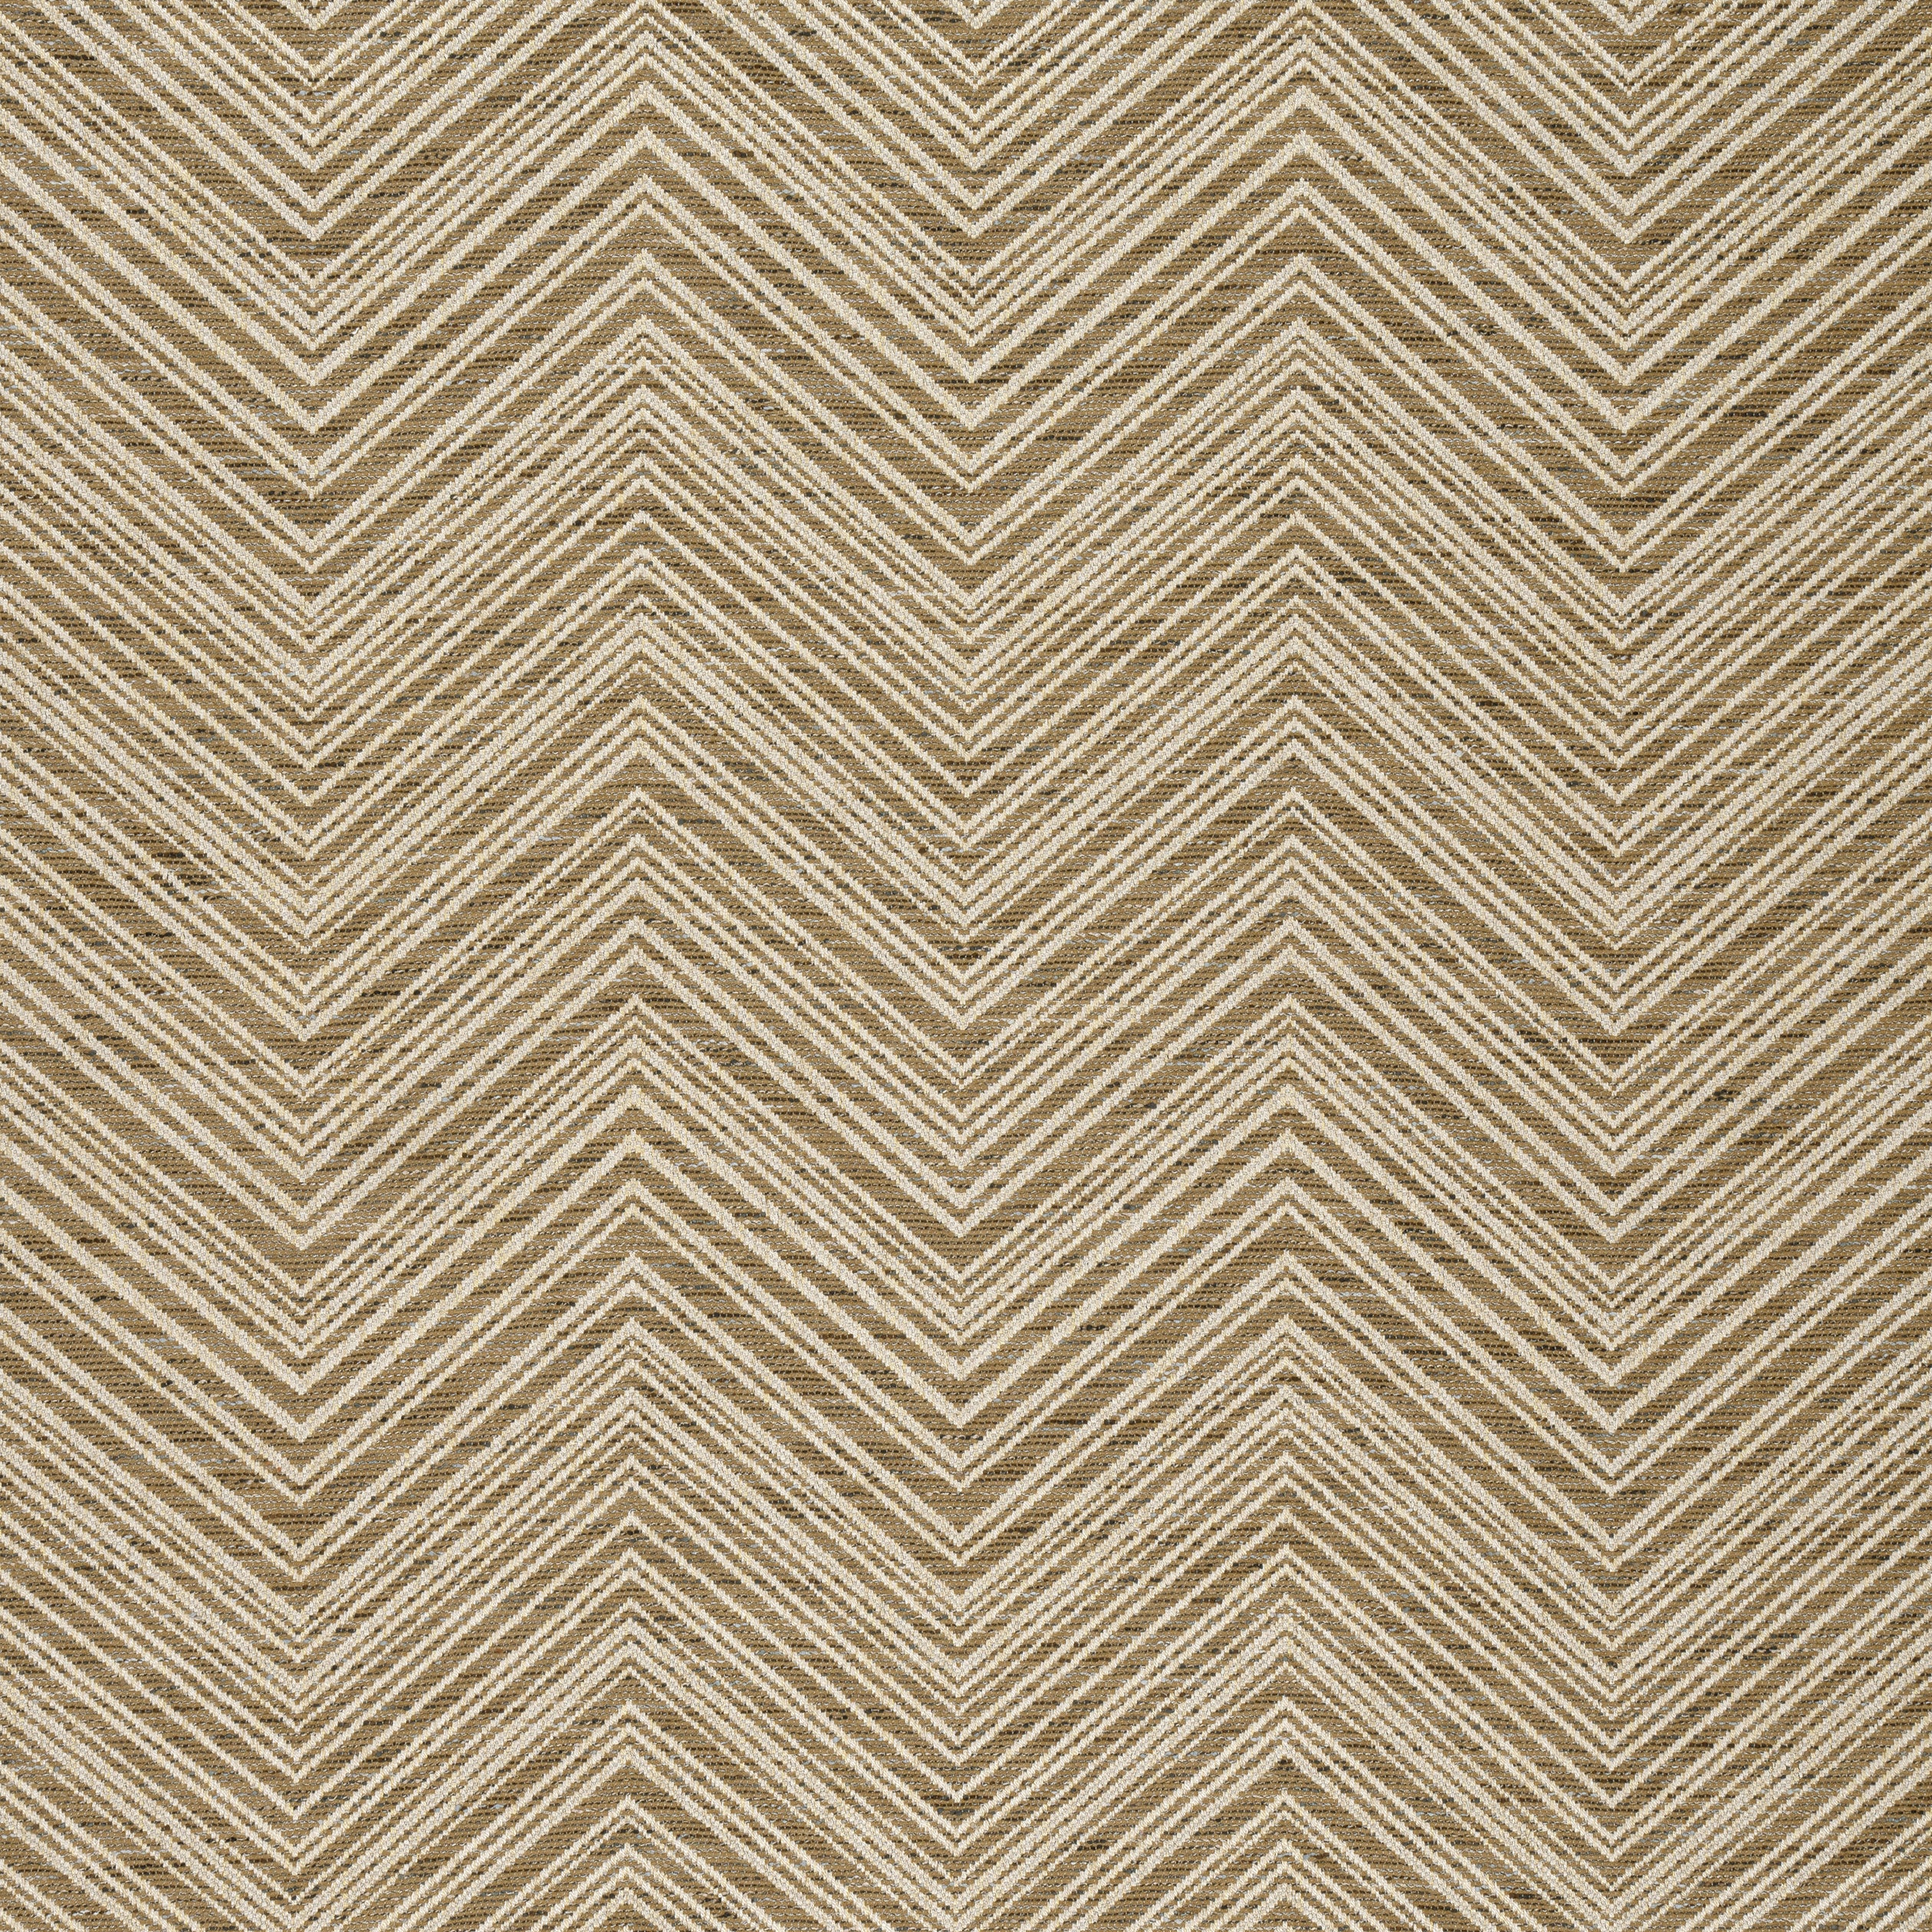 Monti Chevron fabric in camel color - pattern number W77139 - by Thibaut in the Veneto collection